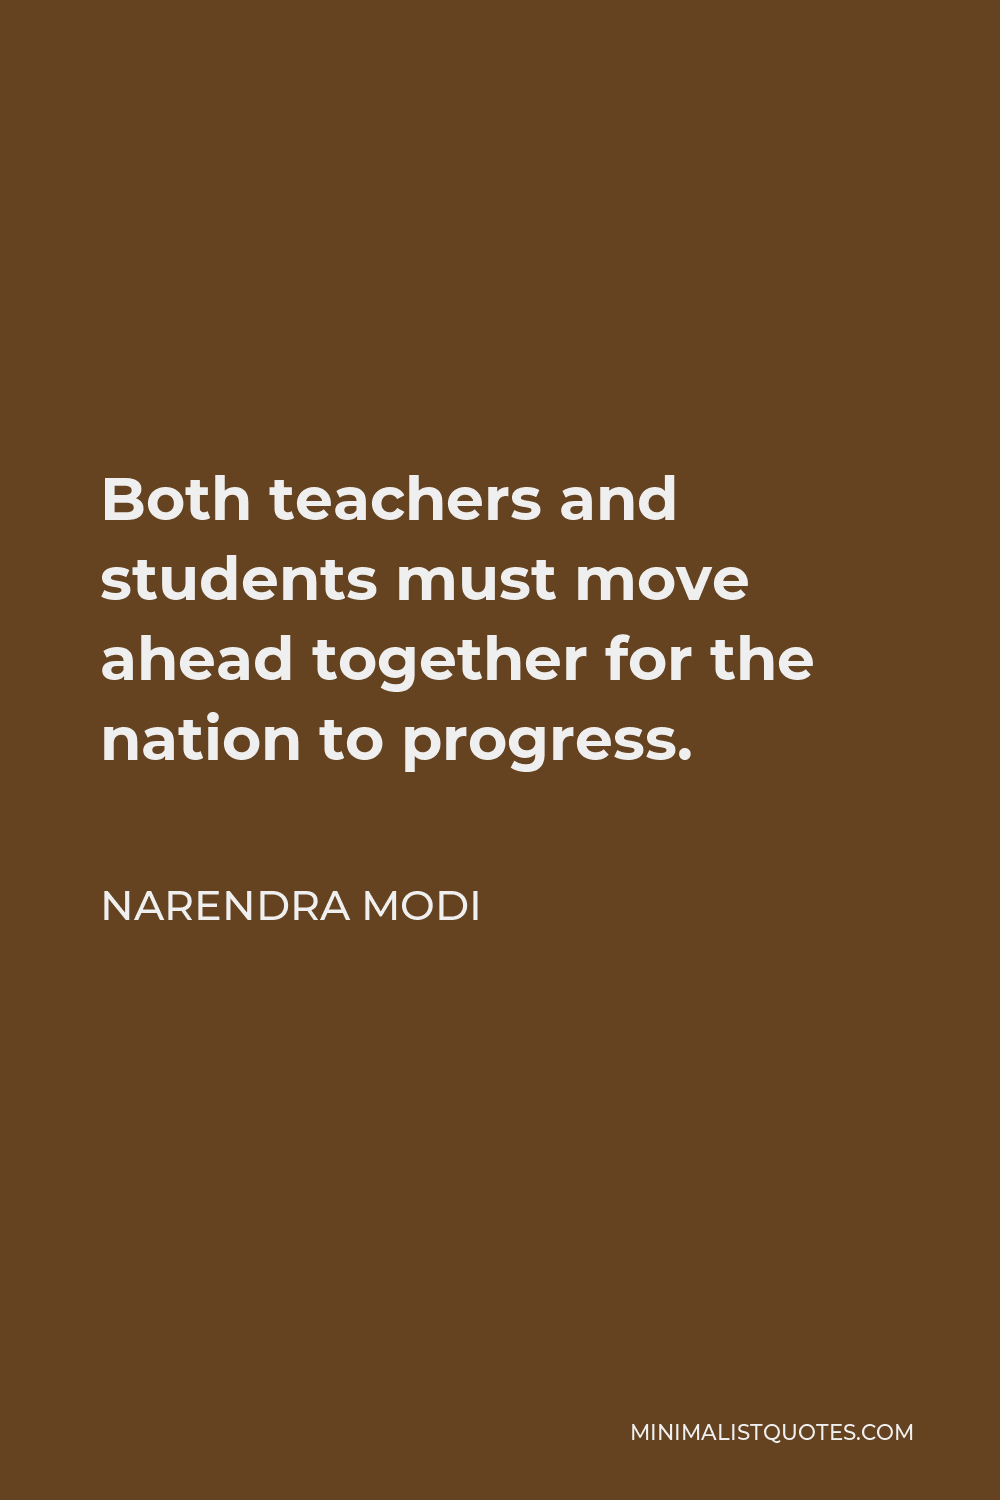 Narendra Modi Quote - Both teachers and students must move ahead together for the nation to progress.